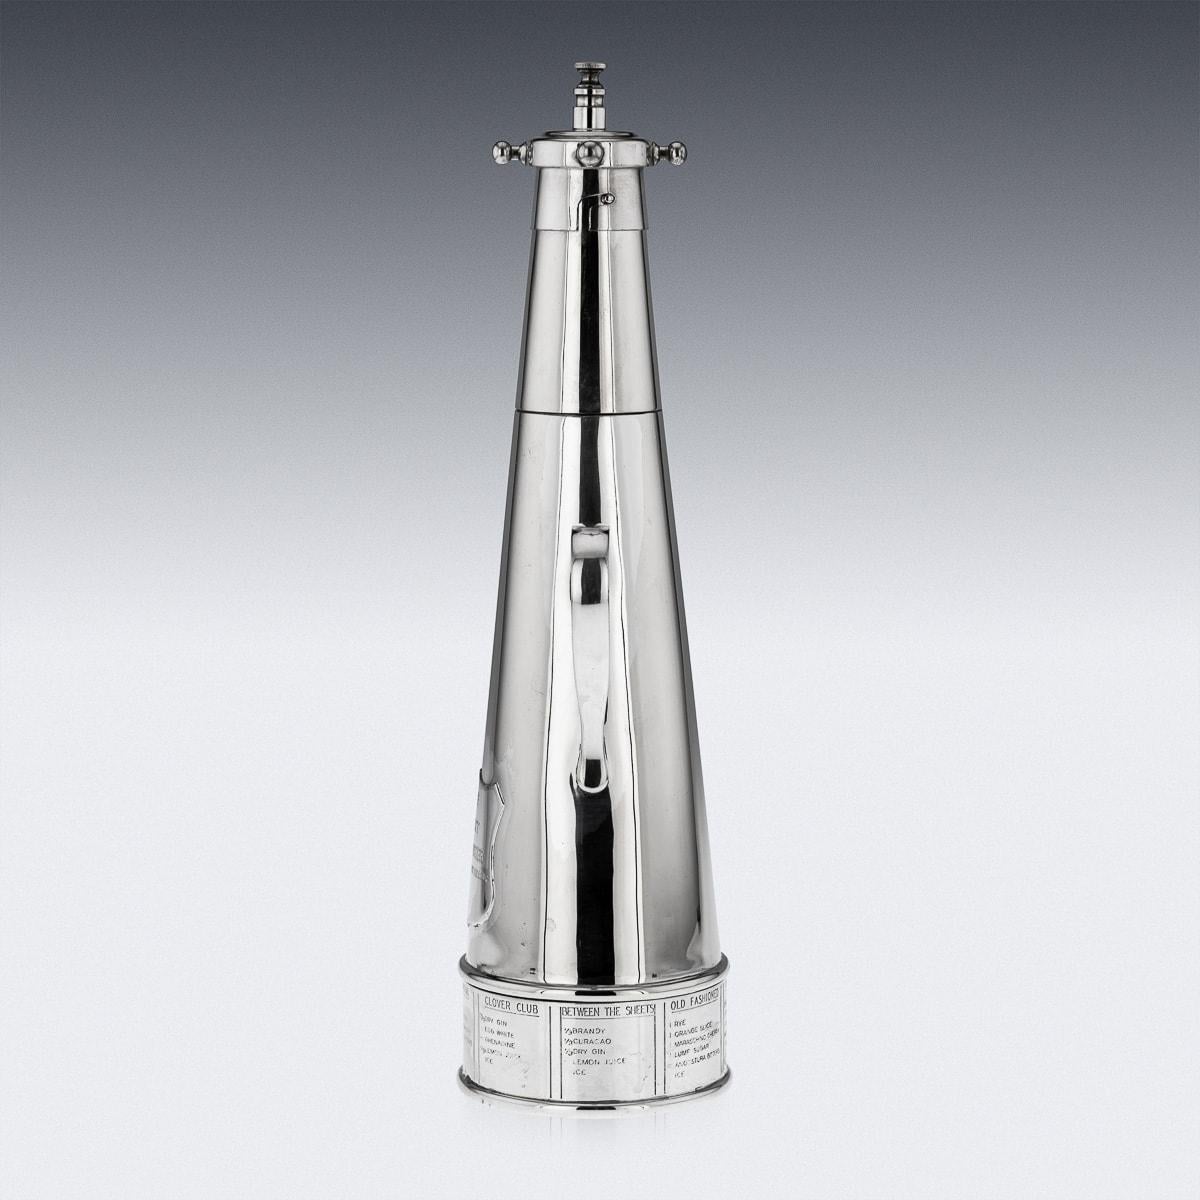 British ' The Thirst Extinguisher ' Silver Plated Cocktail Shaker, Asprey & Co, c.1930